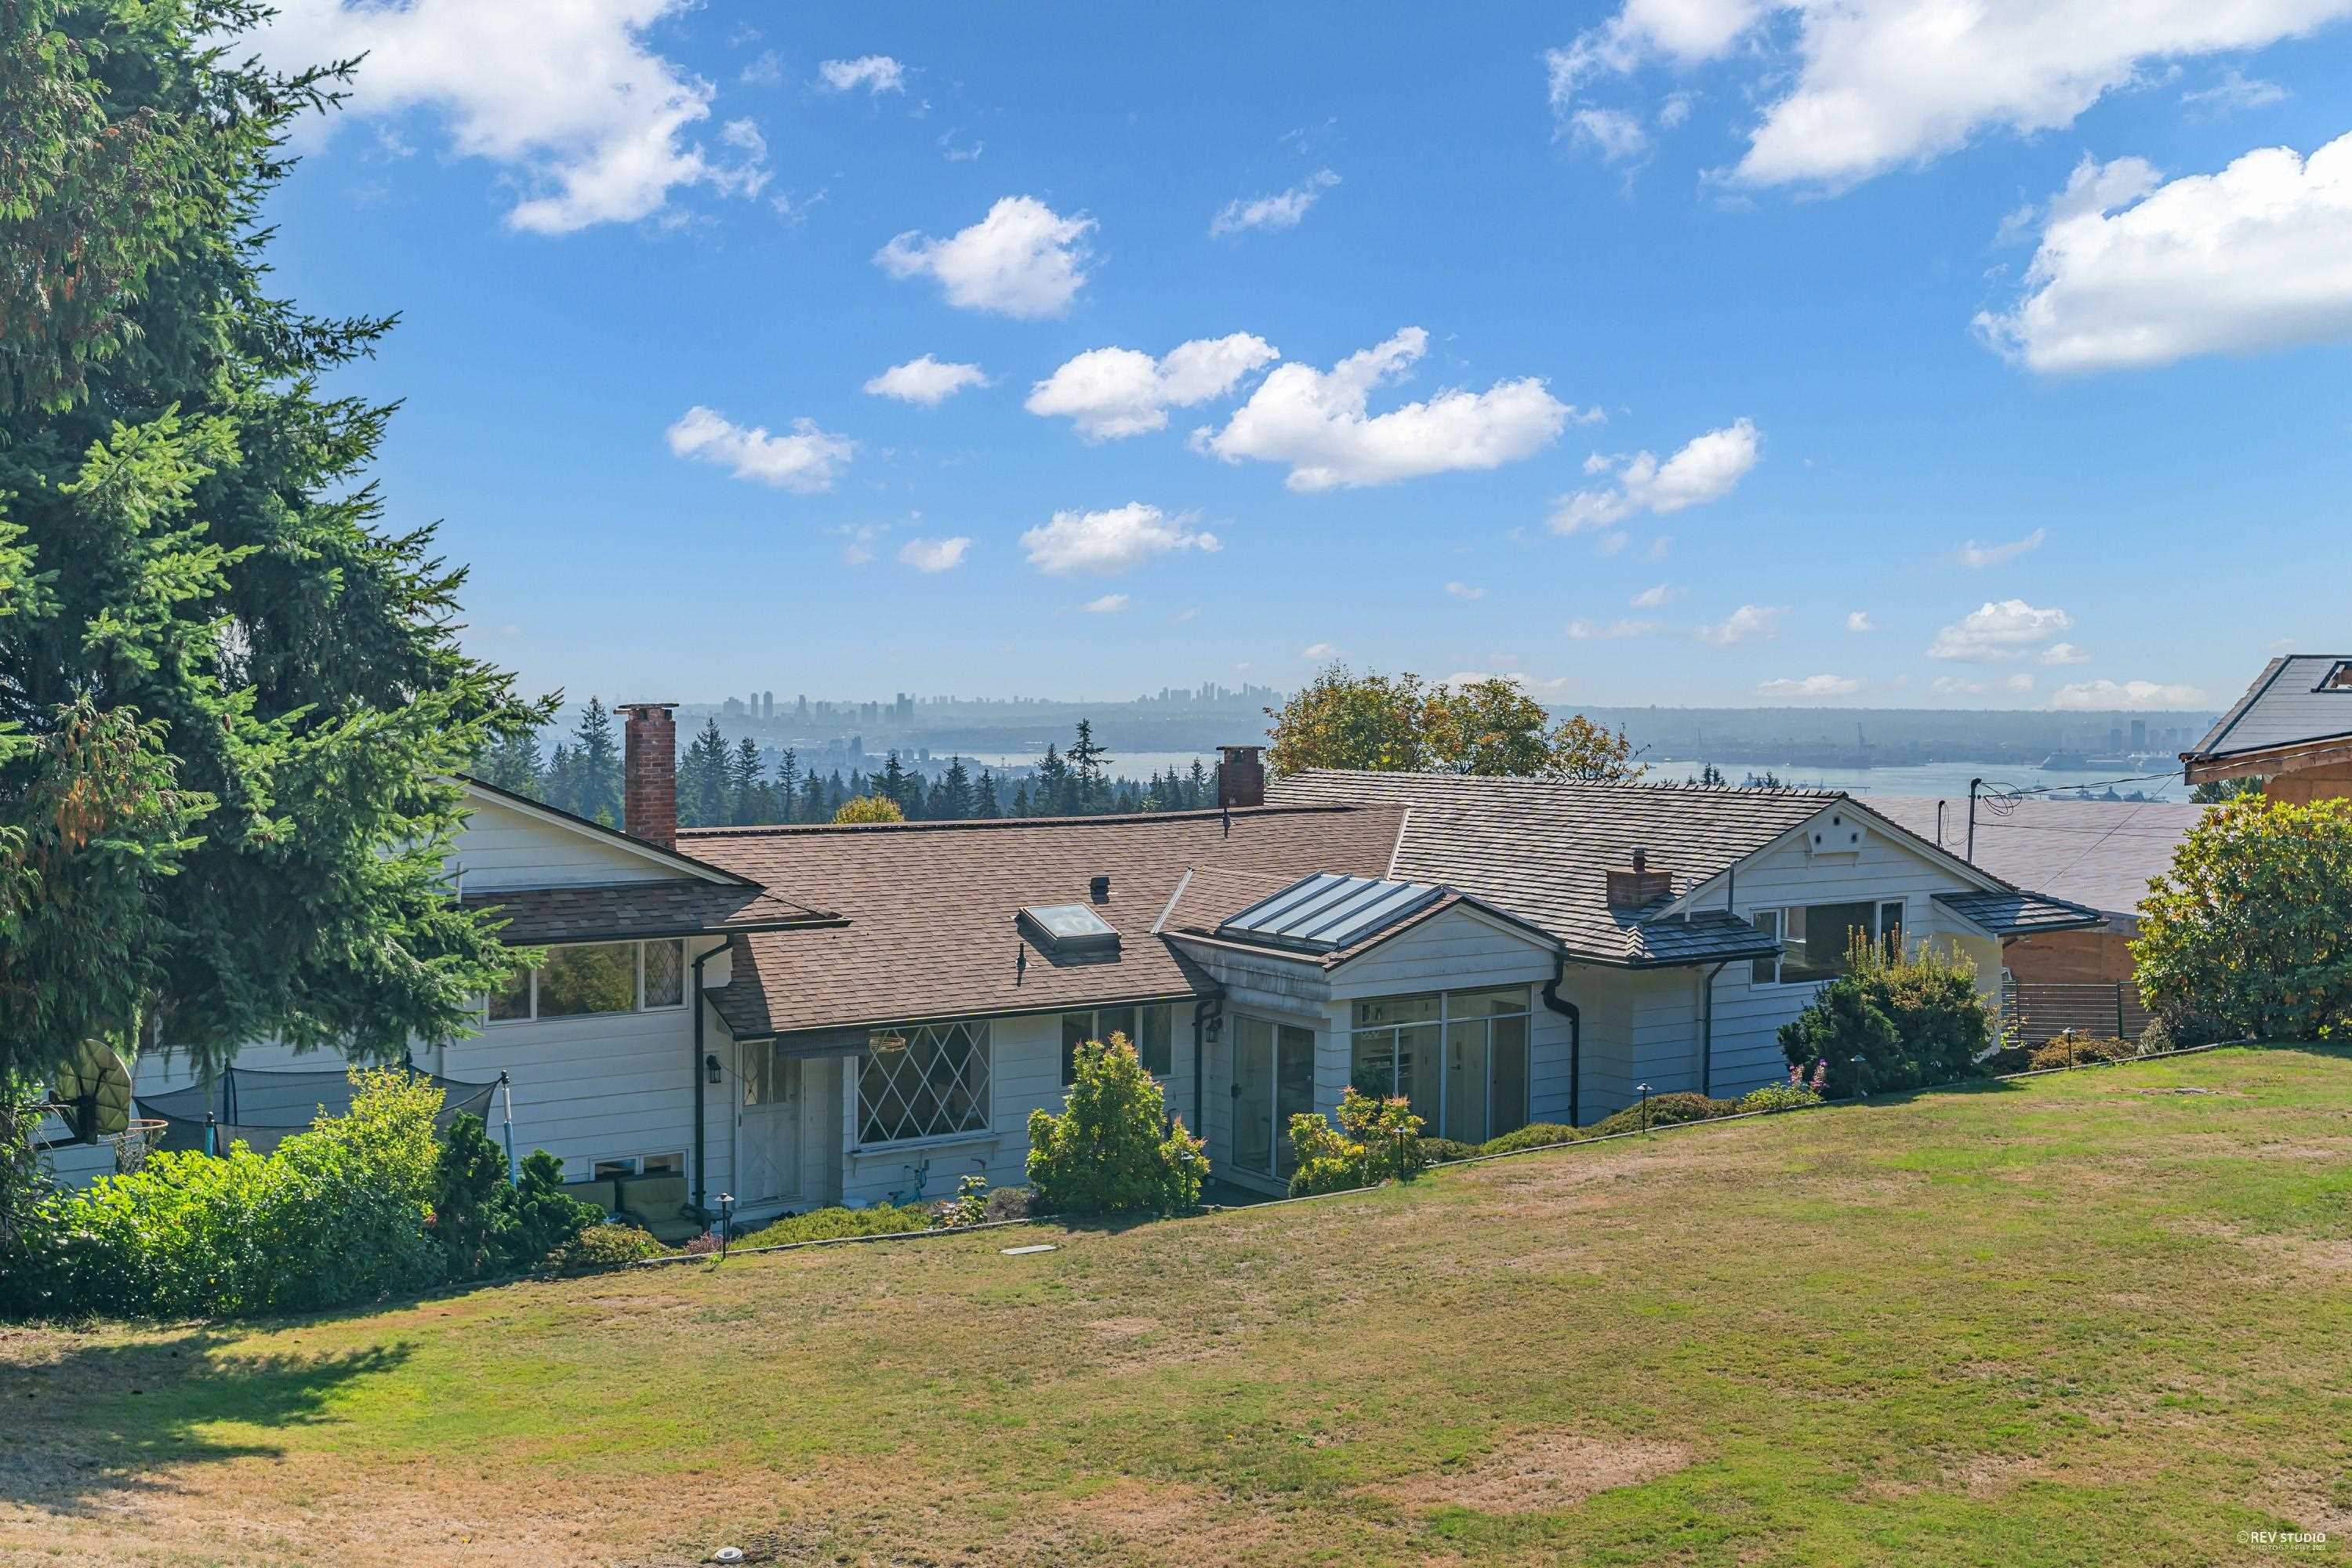 Listing image of 685 KING GEORGES WAY